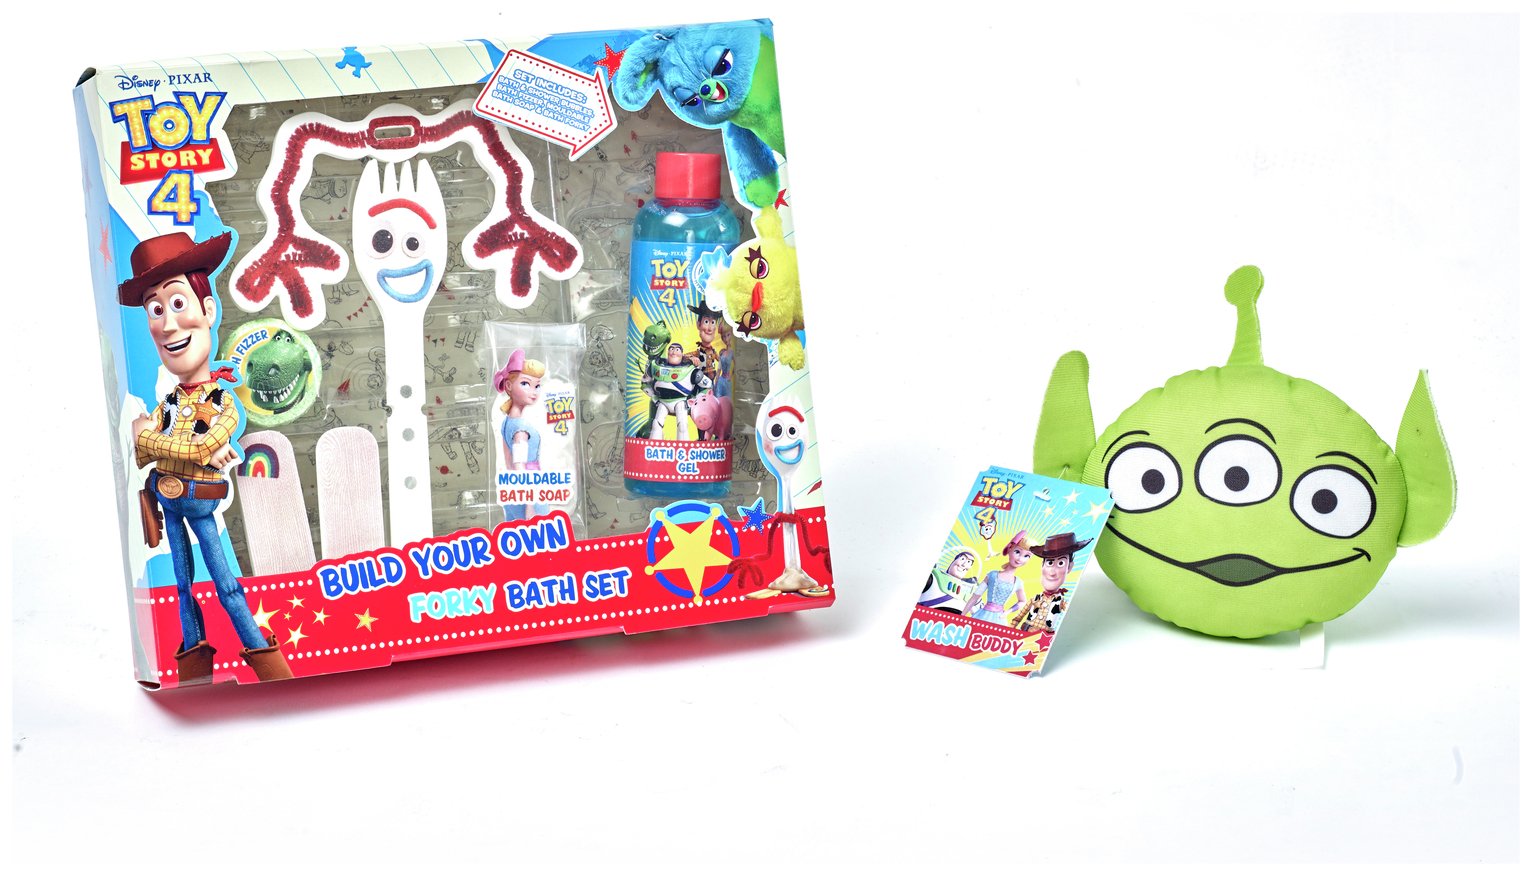 Disney Toy Story's Build Your Own Forky Bath Set